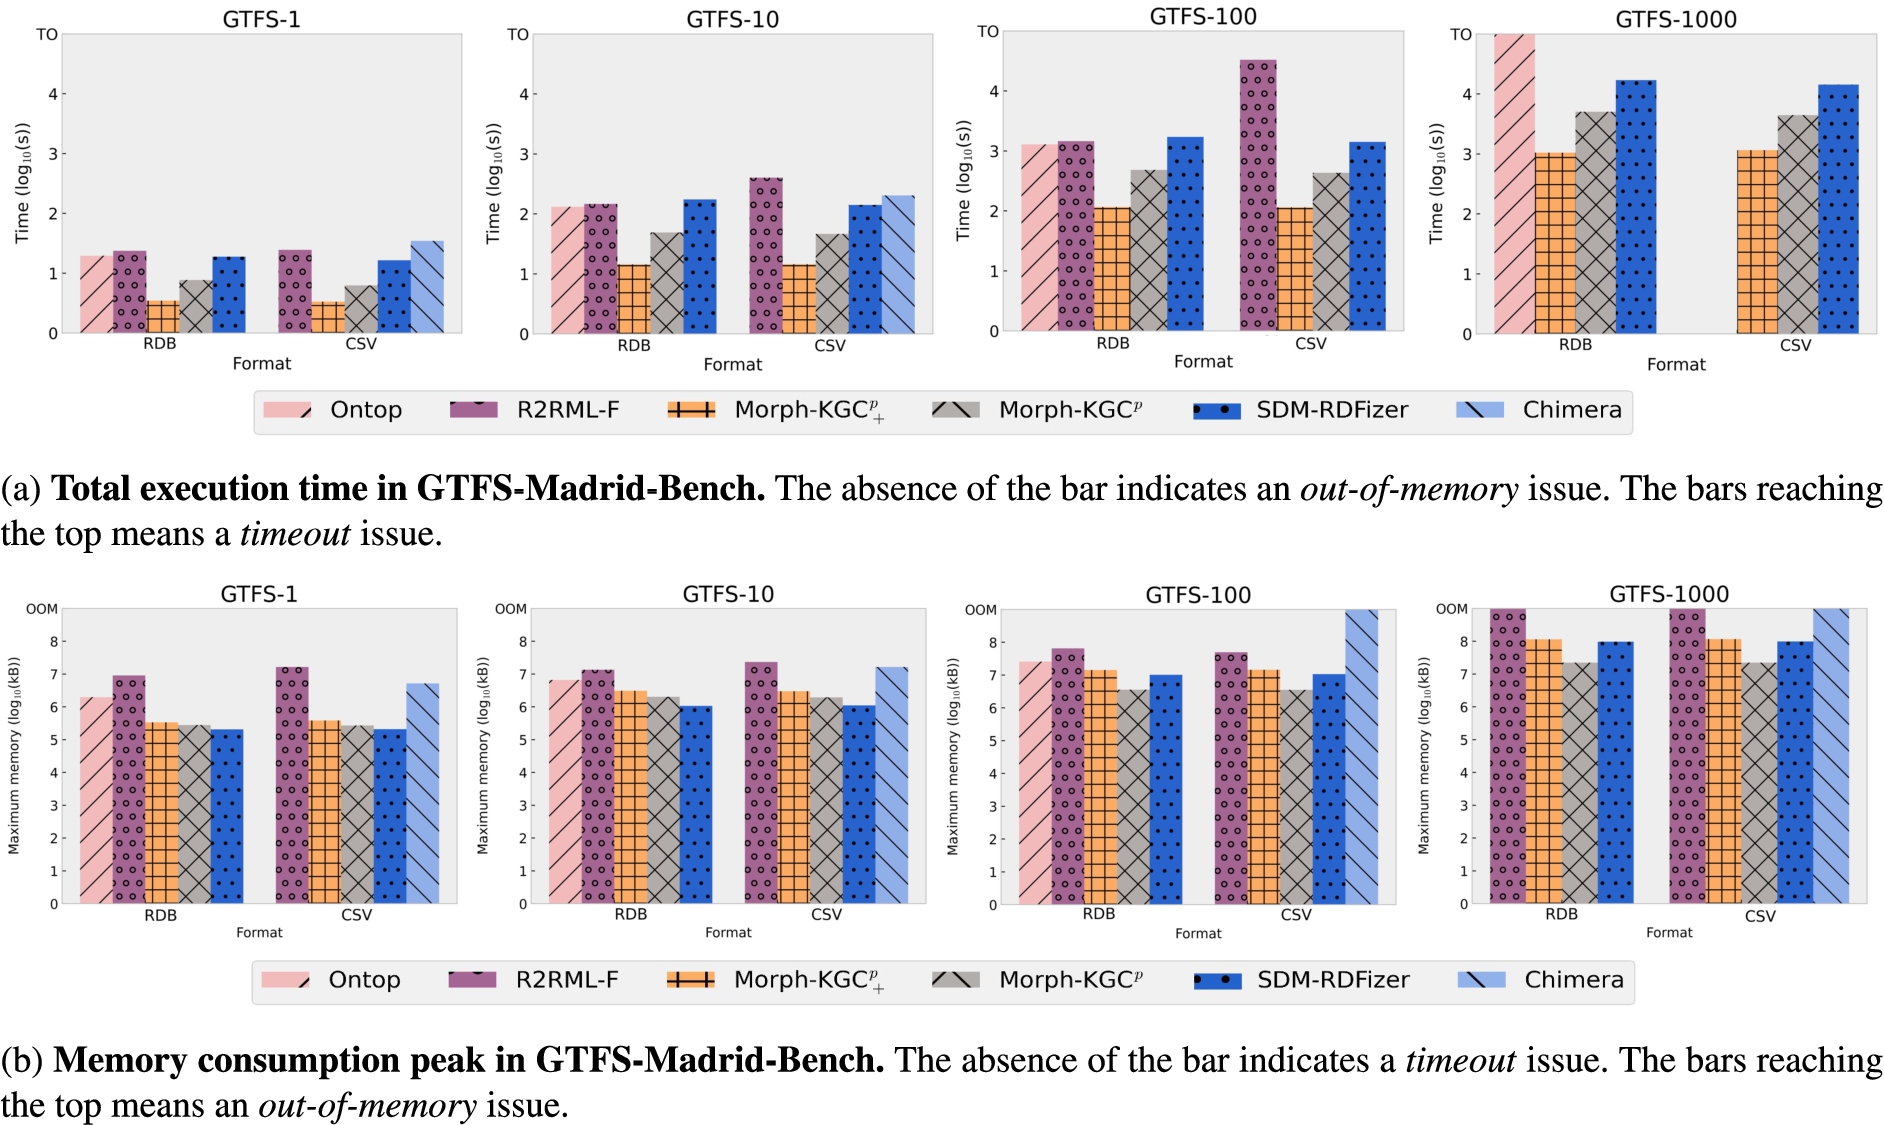 Total execution time and memory consumption peak in GTFS-Madrid-Bench. KGC time in seconds and memory consumption time in kB (logarithmic scale) of the tabular datasets from GTFS-Madrid-Bench with data scaling factors 1, 10, 100 and 1000.